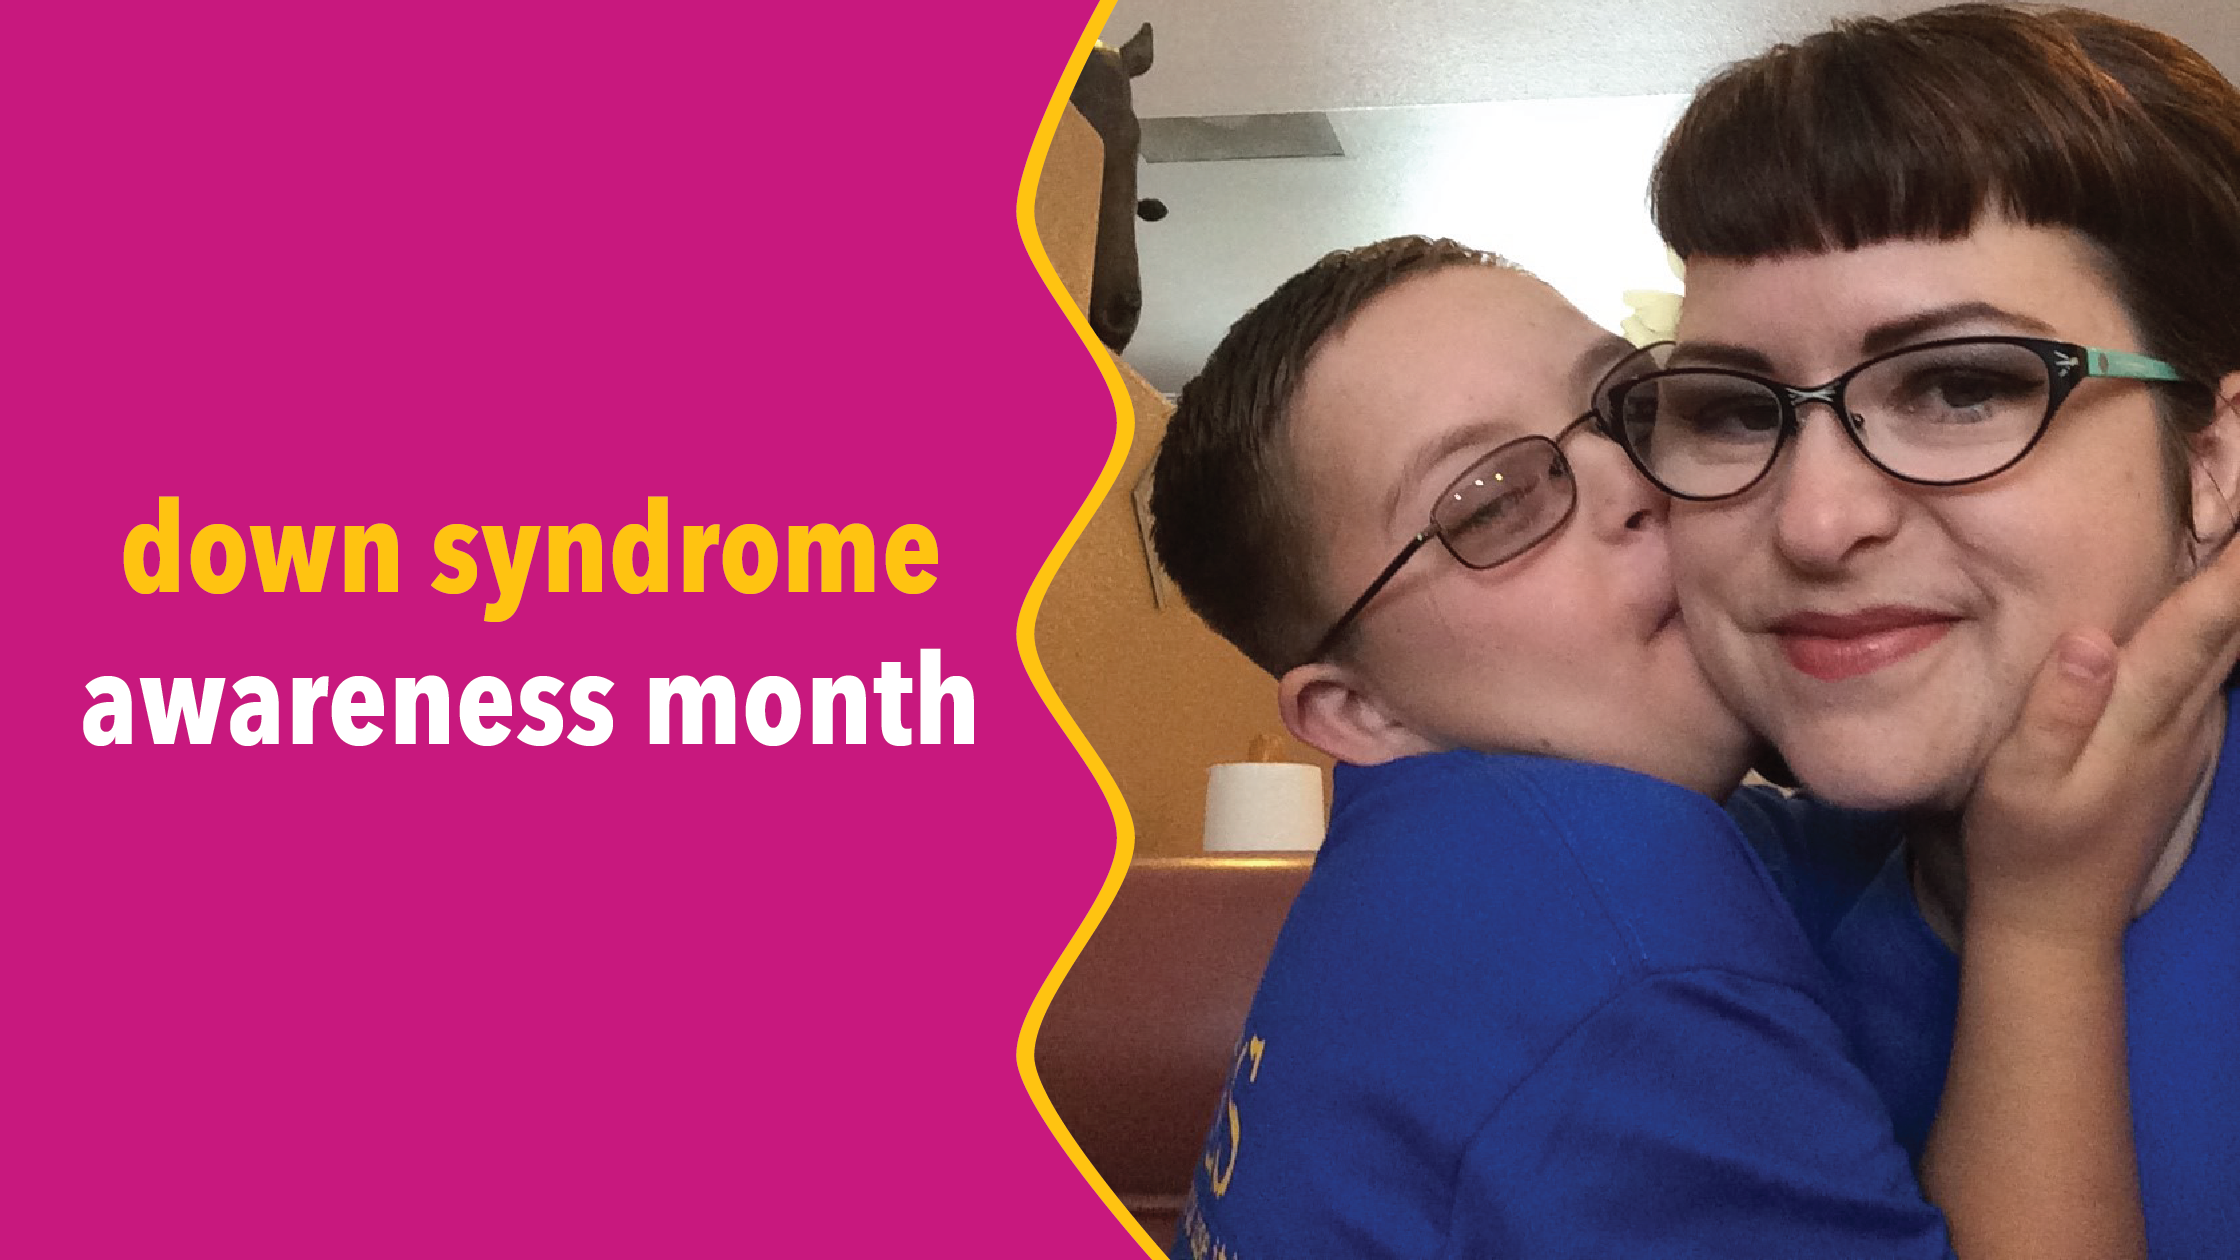 graphic with text "down syndrome awareness month" with image of boy kissing woman on the cheek